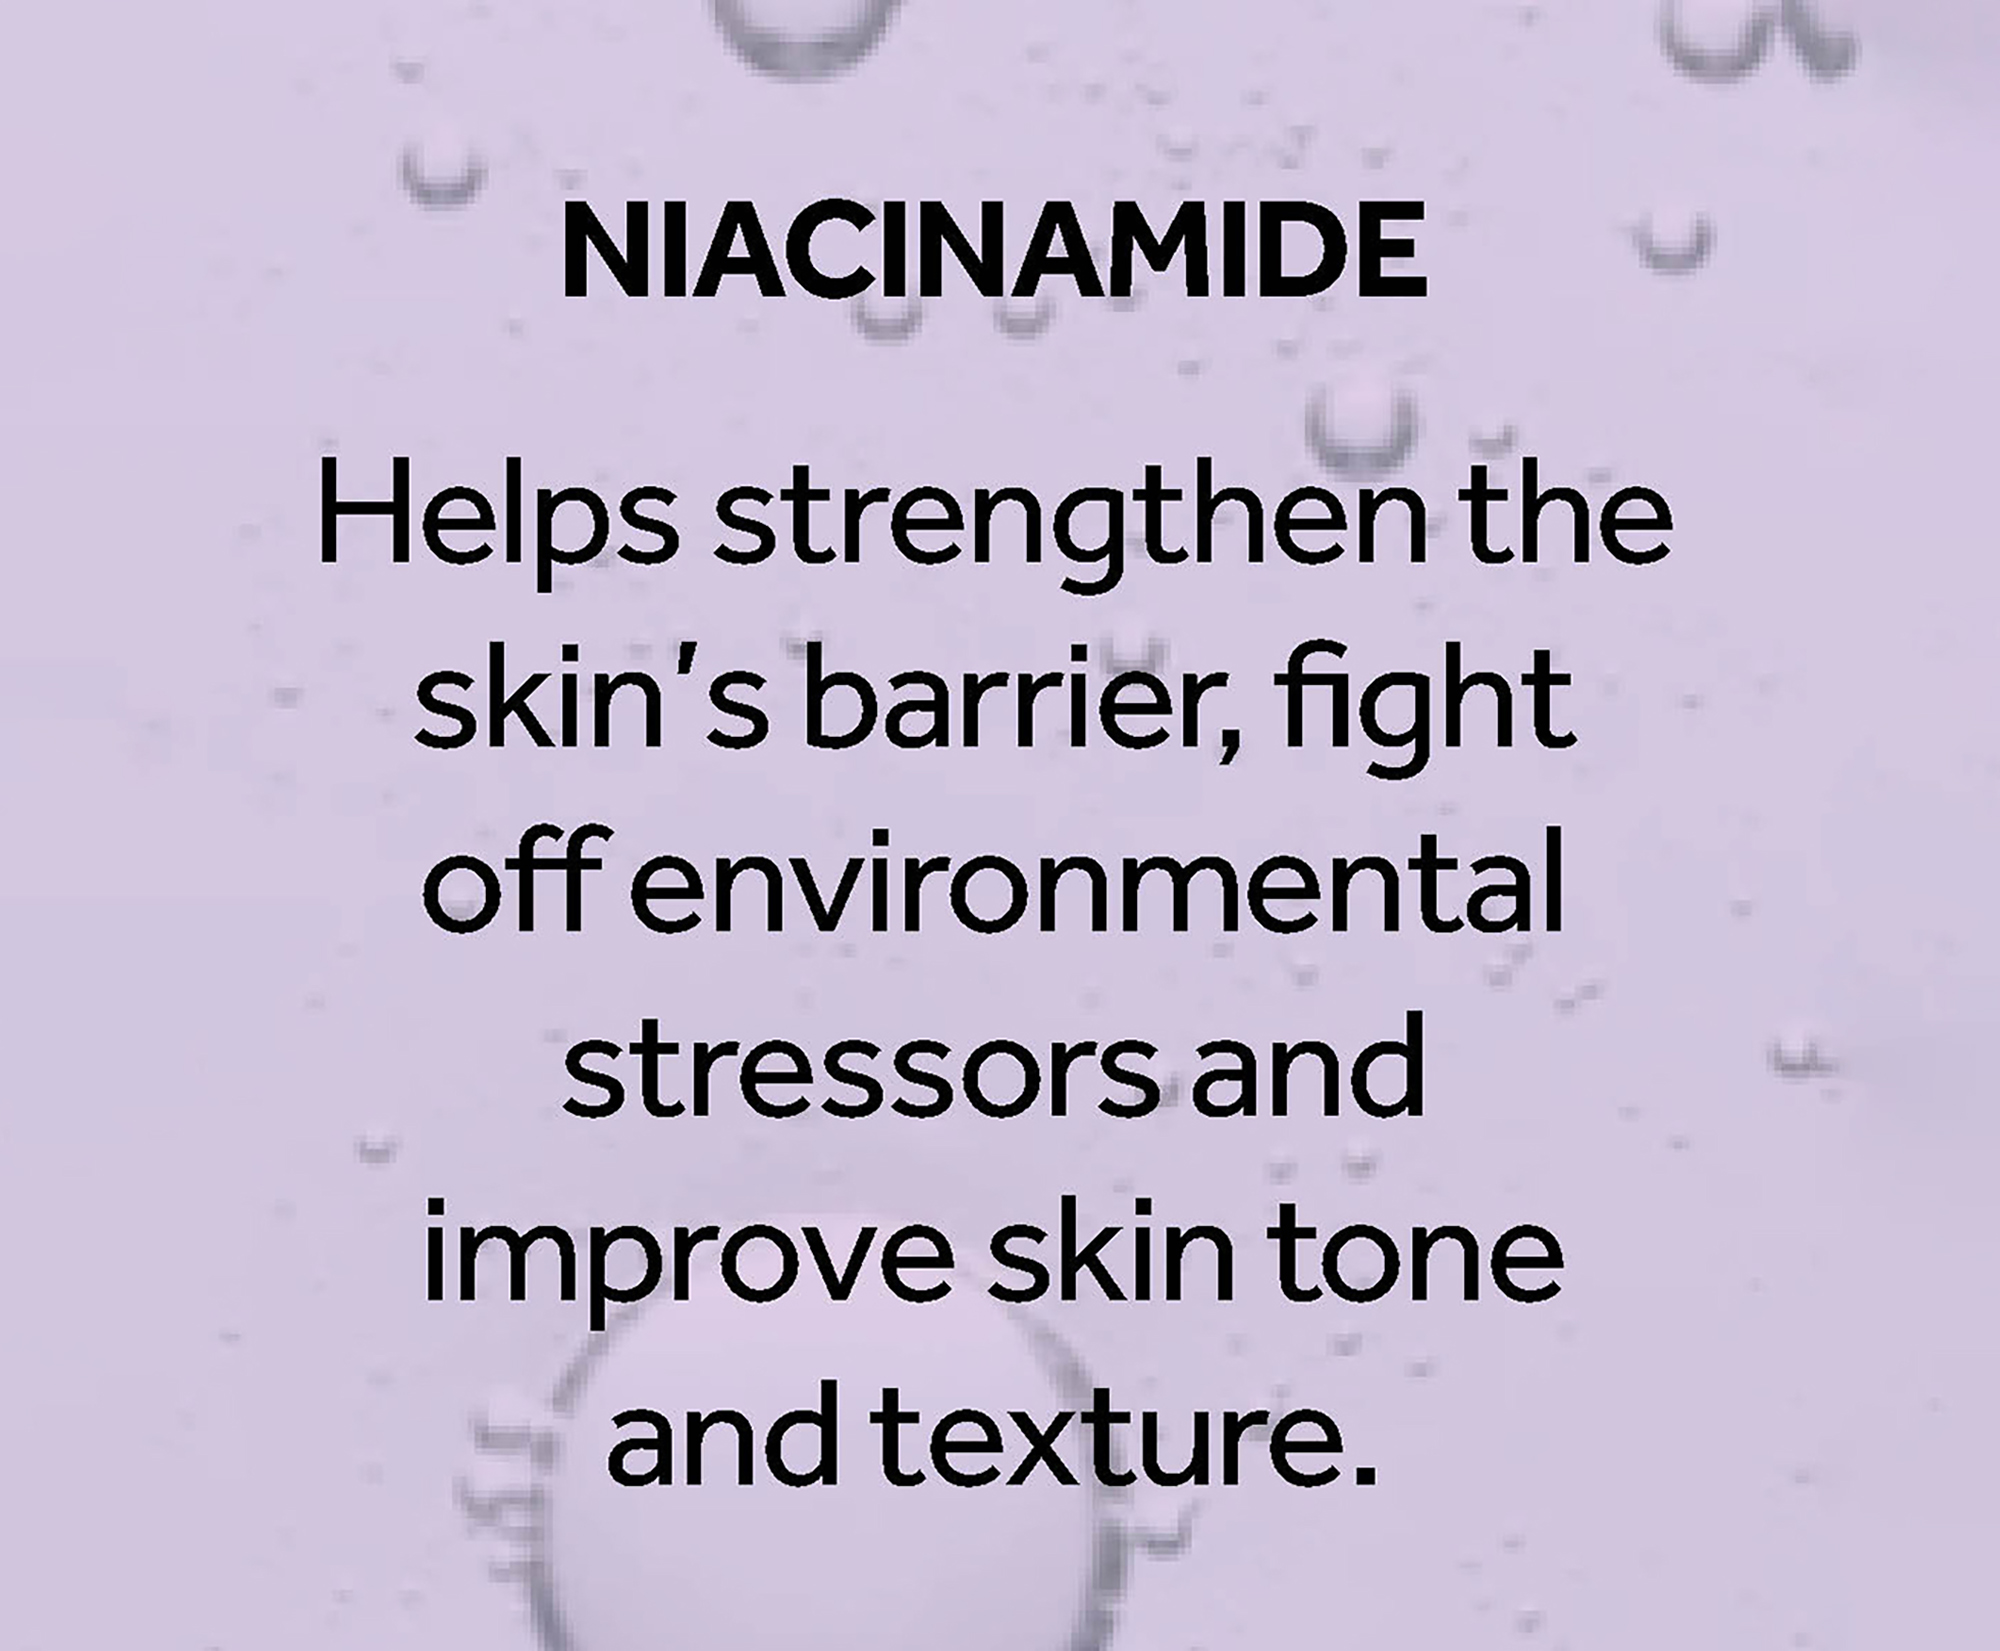 Niacinimide helps strengthen the skin's barrier, fight off environmental stressors and improve skin tone and texture.